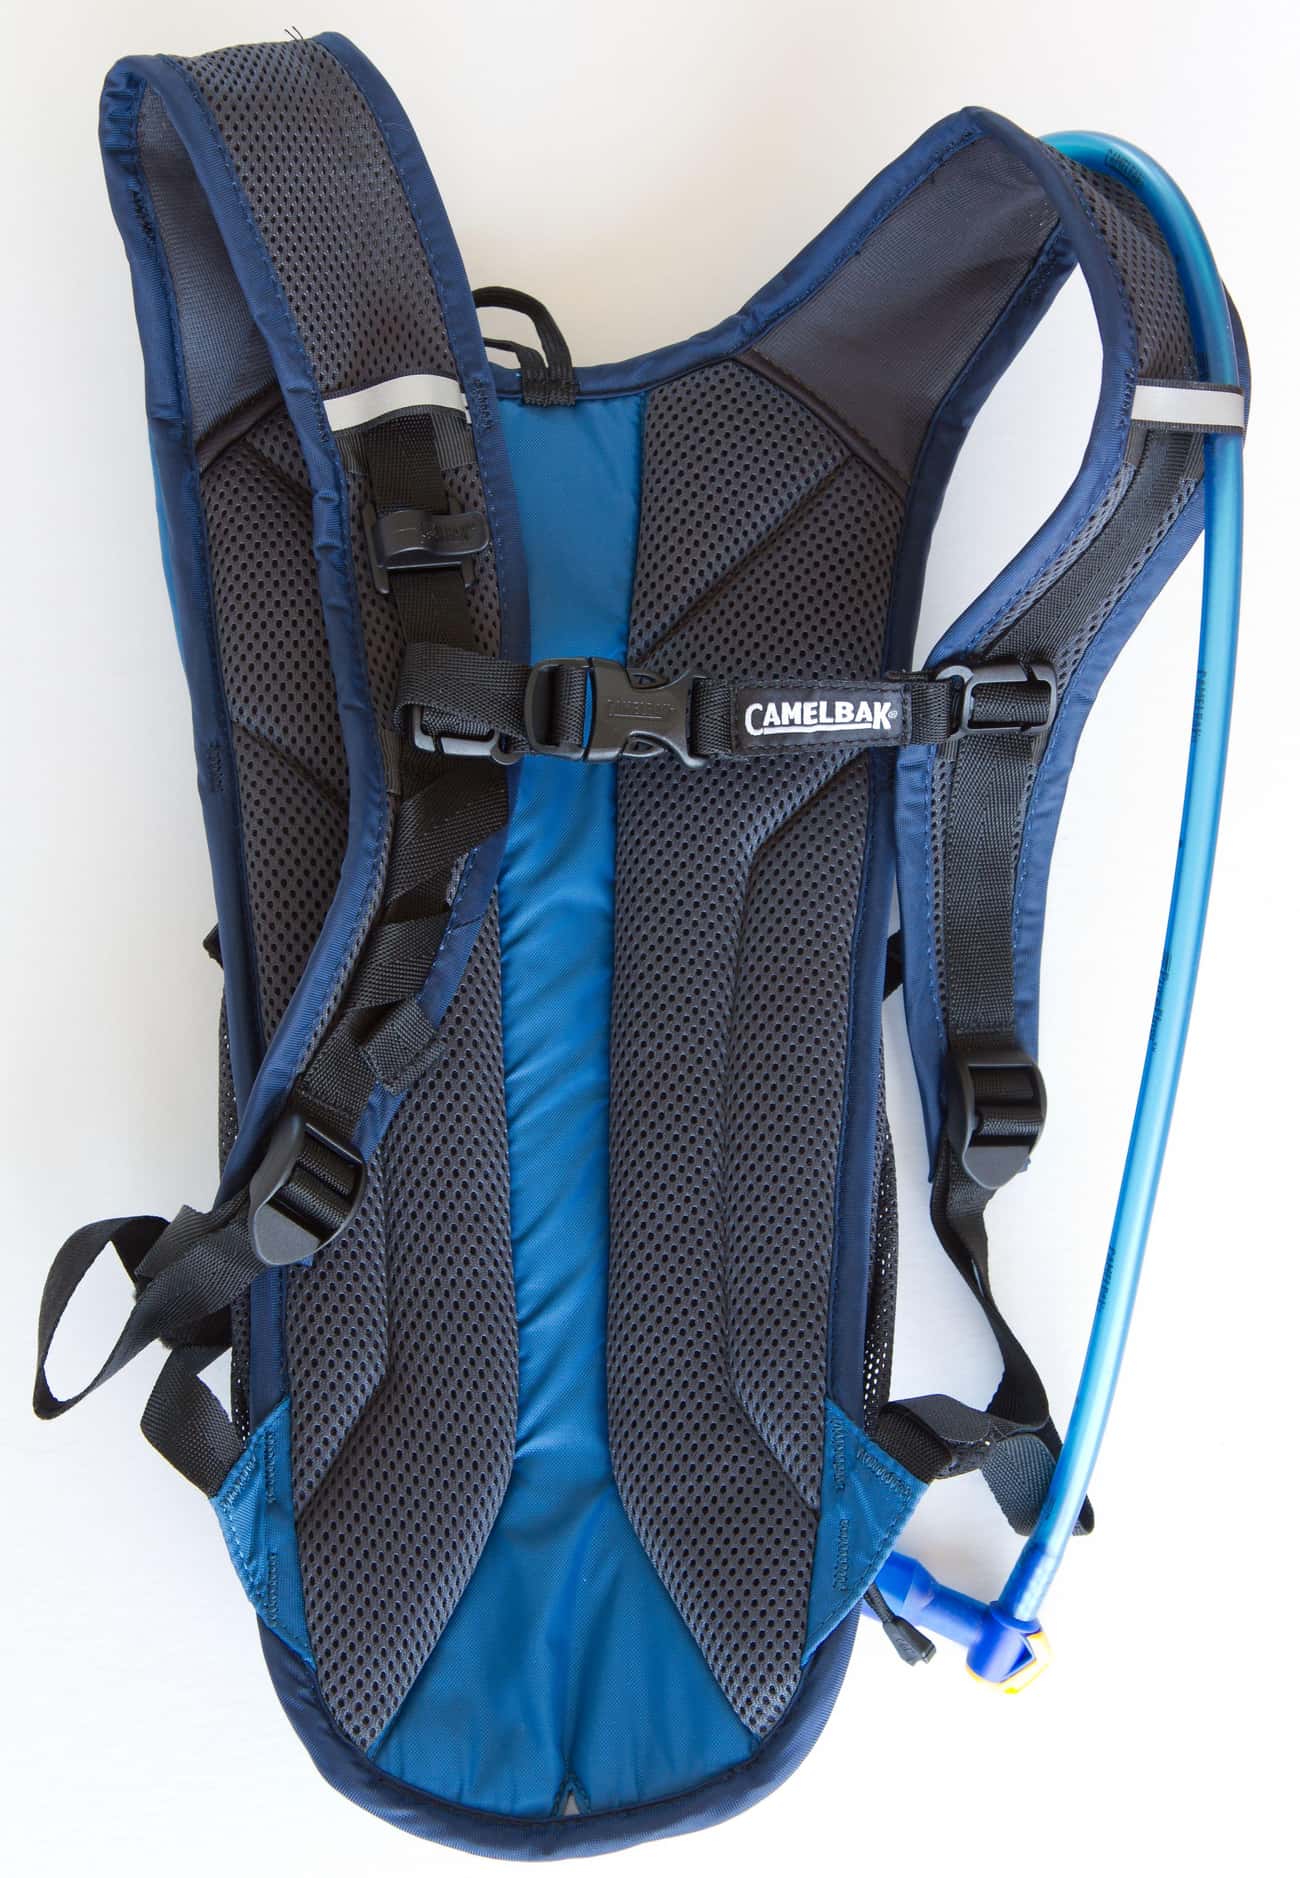 CamelBak Sends Replacements Or Parts